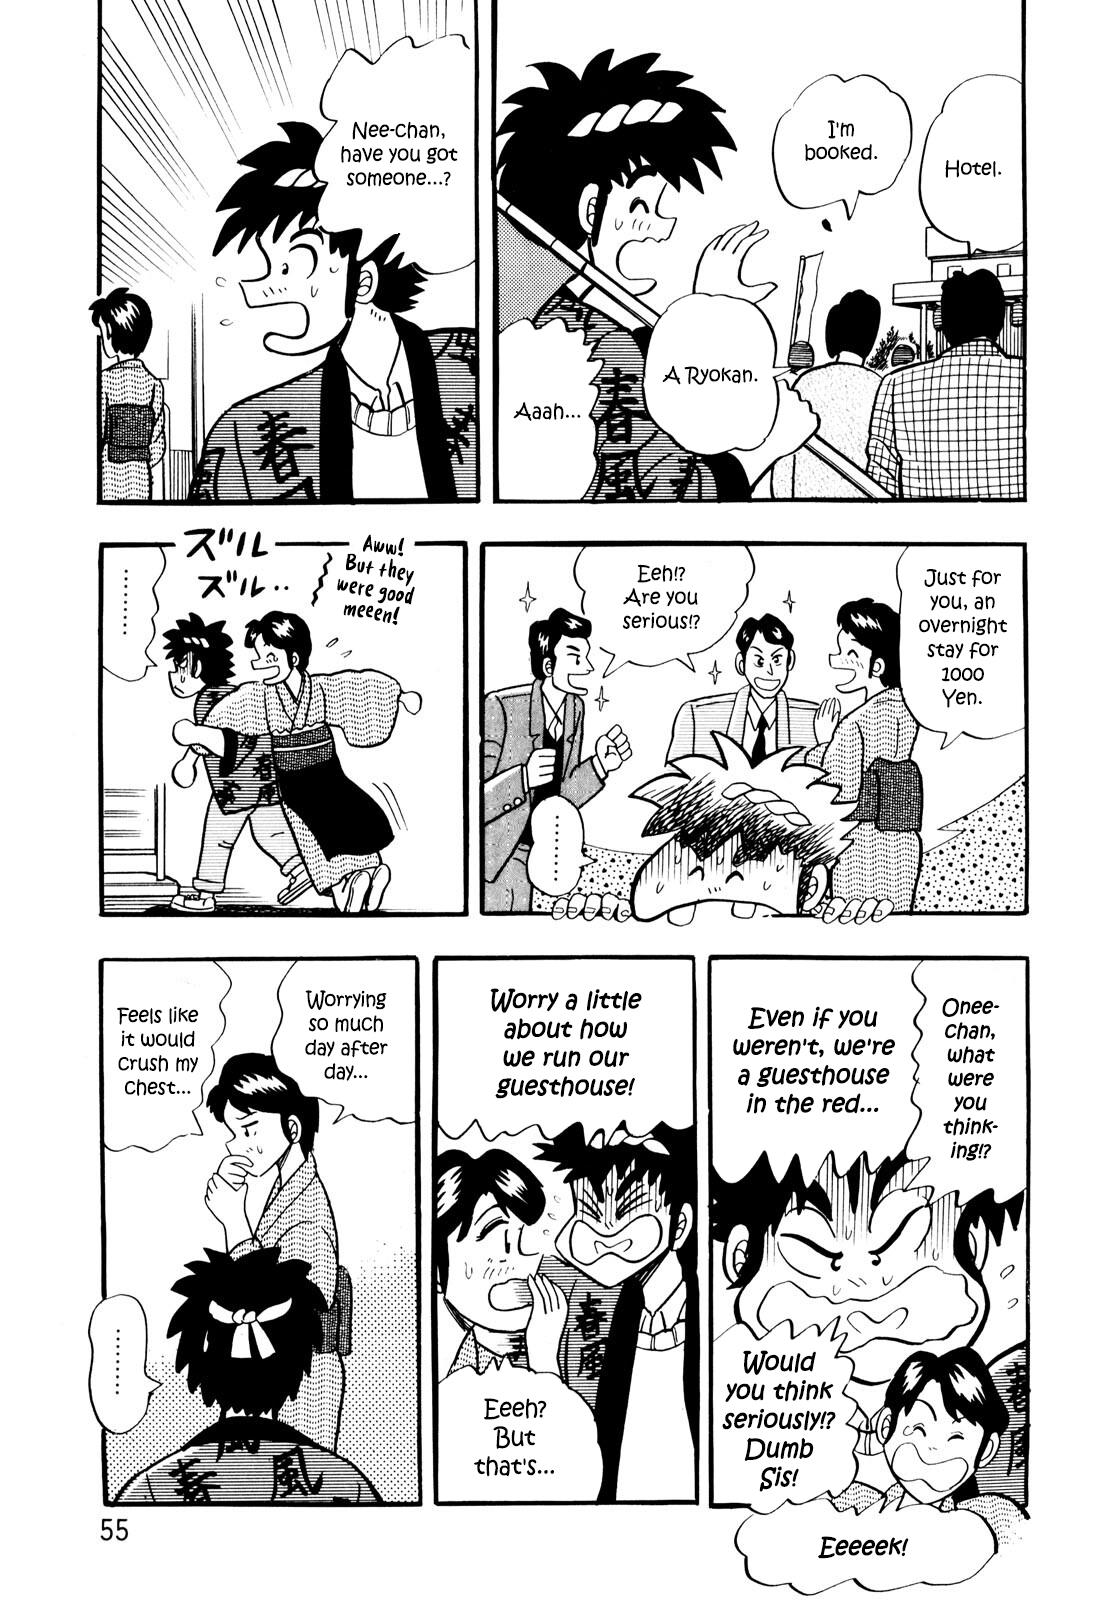 Welcome To Harukaze - A Mahjong Guesthouse Story Vol.1 Chapter 3 - Picture 3